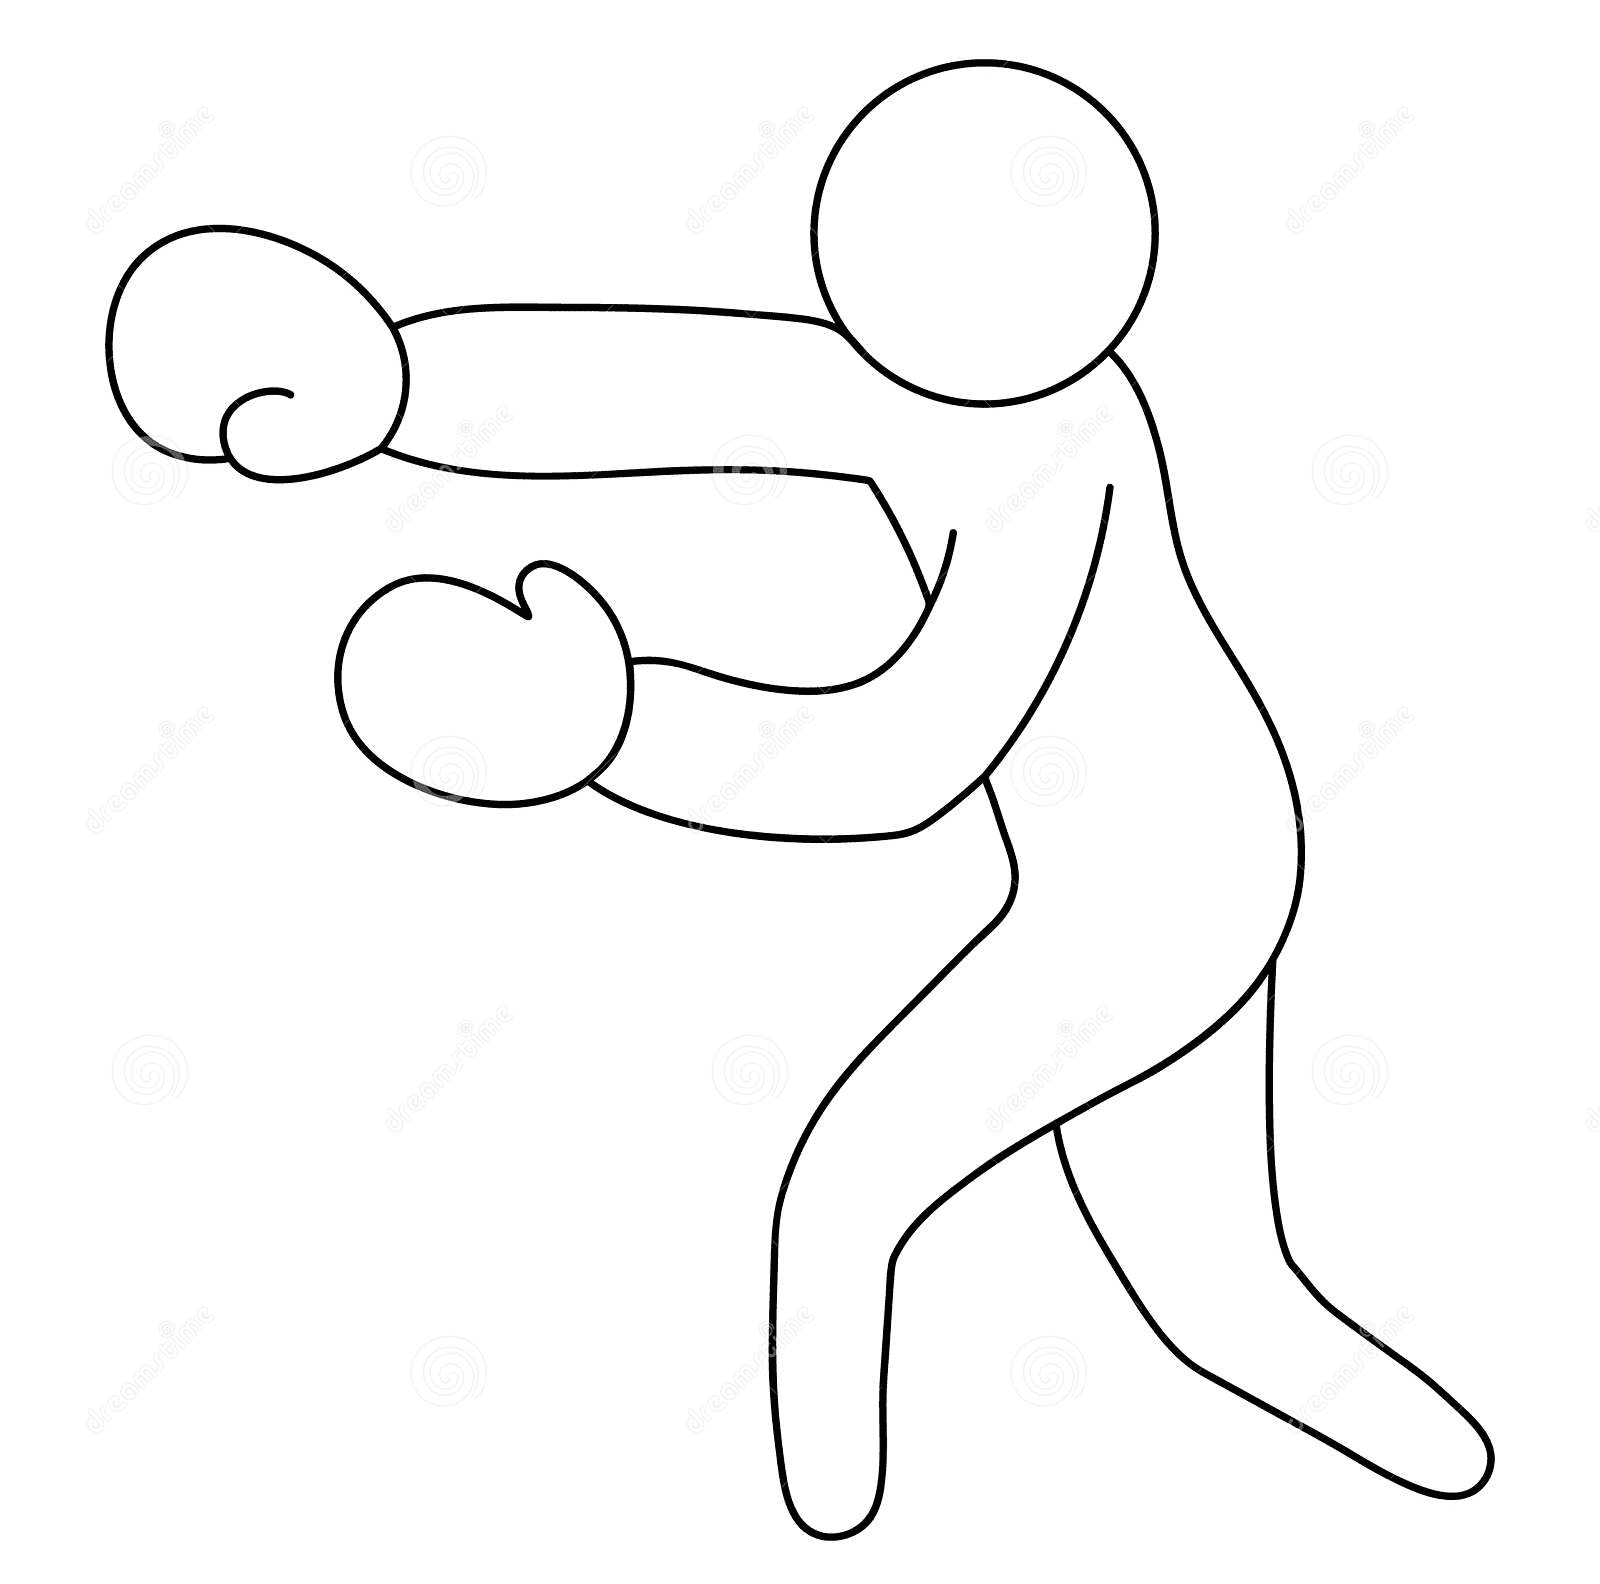 The Athlete In Boxing Gloves Is Boxing Image Coloring Page